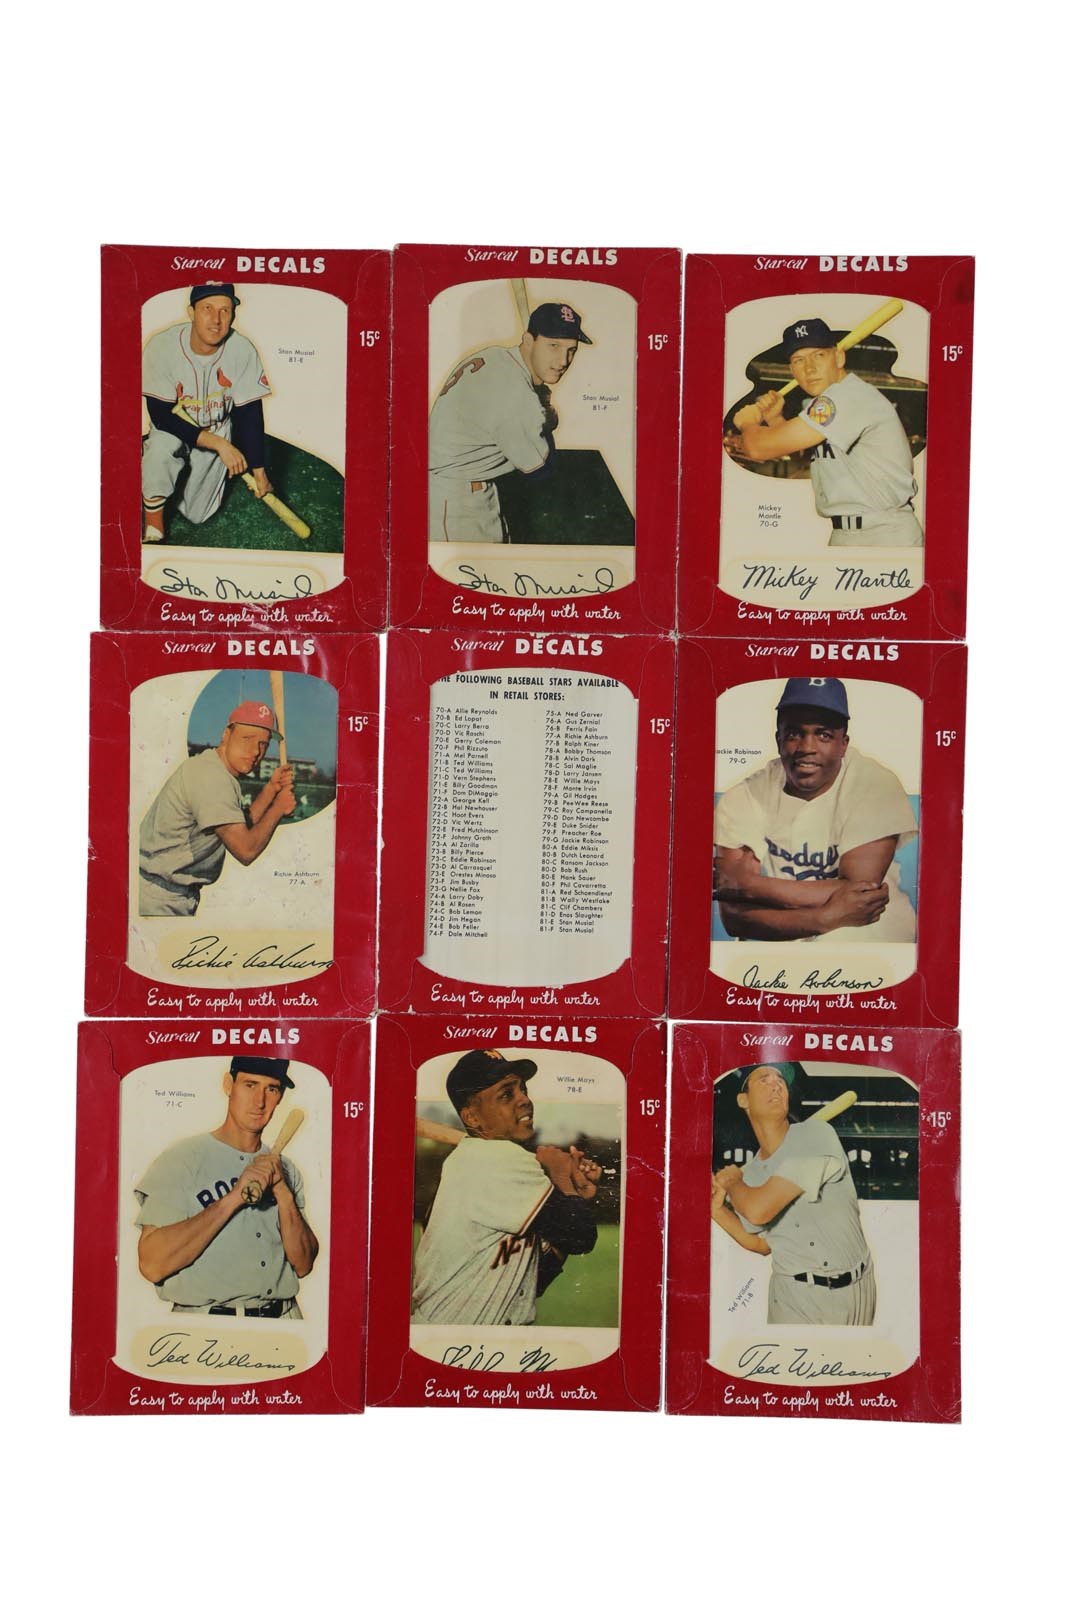 Baseball and Trading Cards - 1952 Star-Cal Decals Type 1 Complete Set with Mickey Mantle & Checklist - Most Complete Set Ever Sold (71/71)